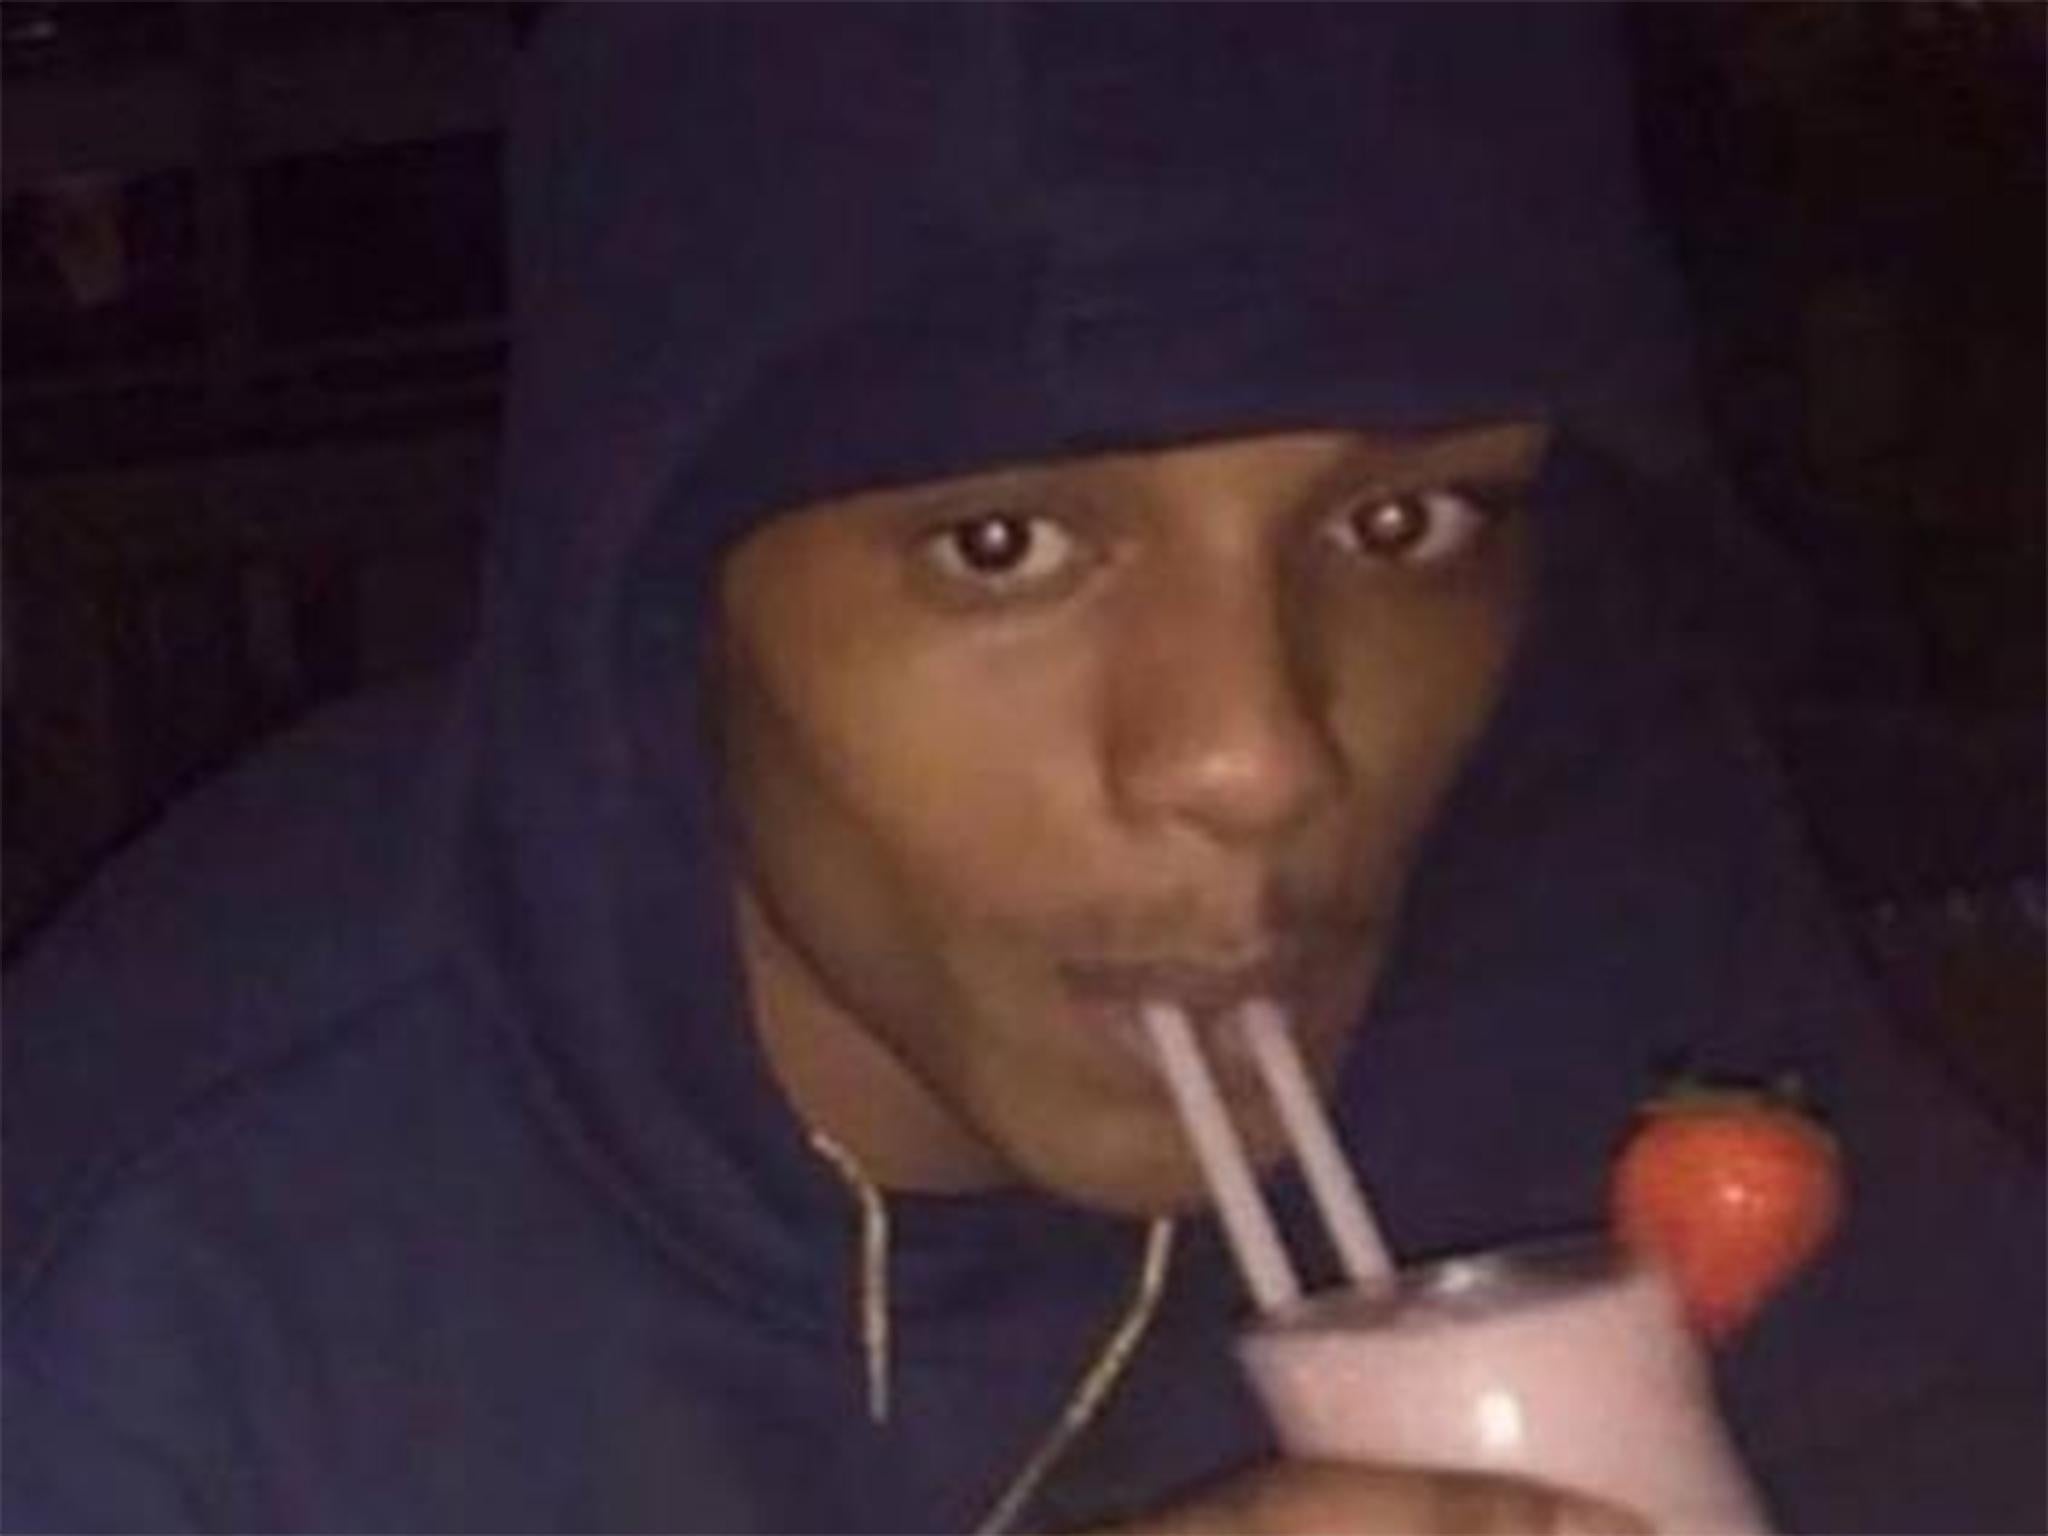 Among the high-profile deaths were 20-year-old Rashan Charles, who died after being chased and apprehended by police in London last summer